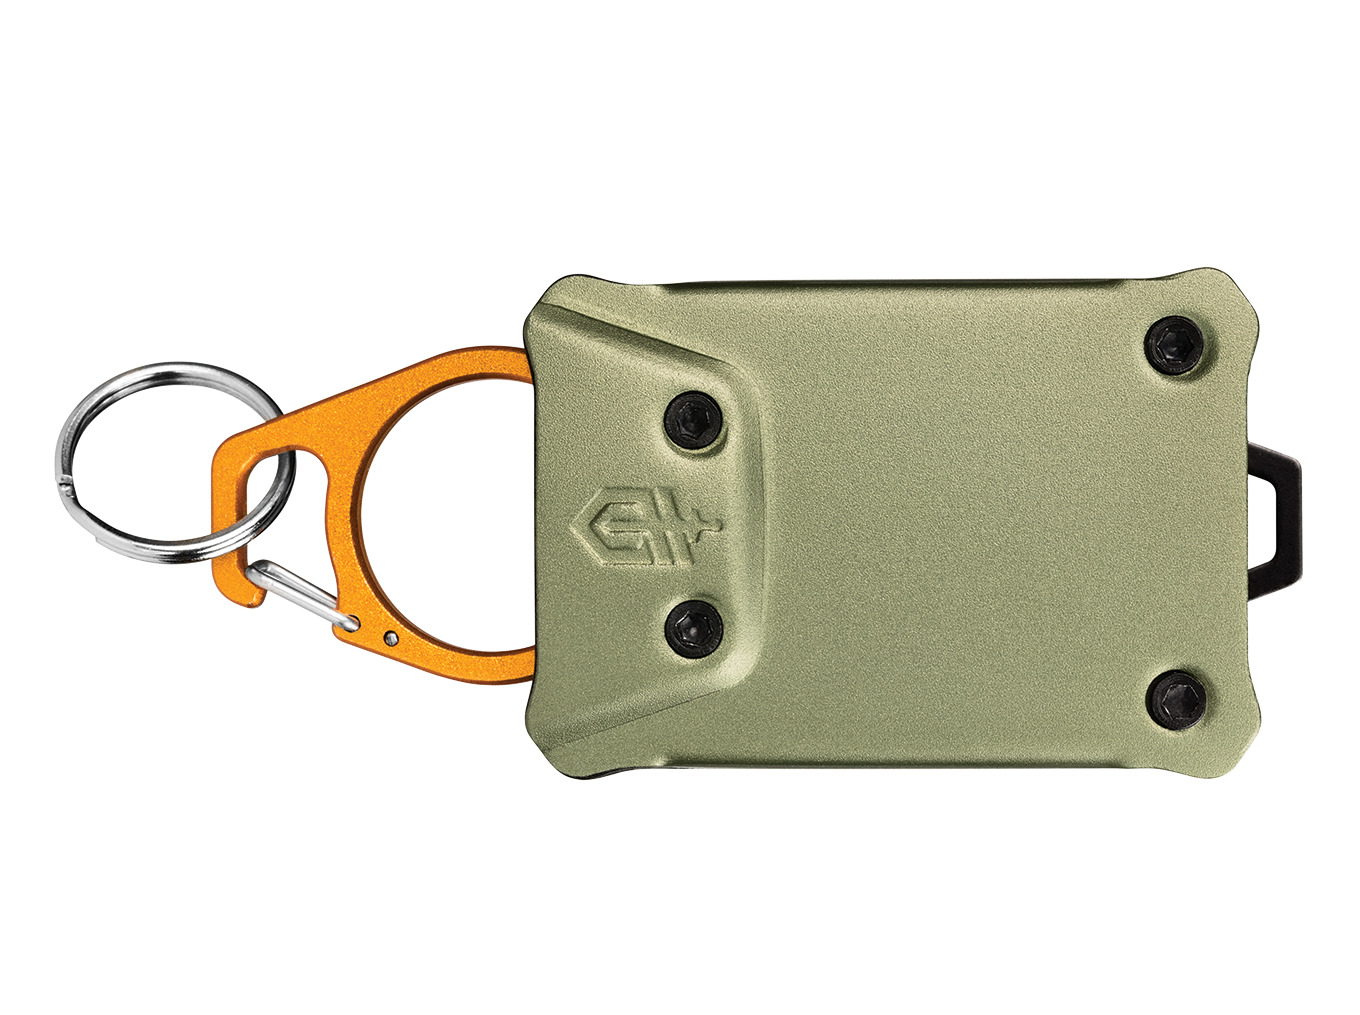 Gerber 31-003297 Defender Compact - Tether Small | 013658151222